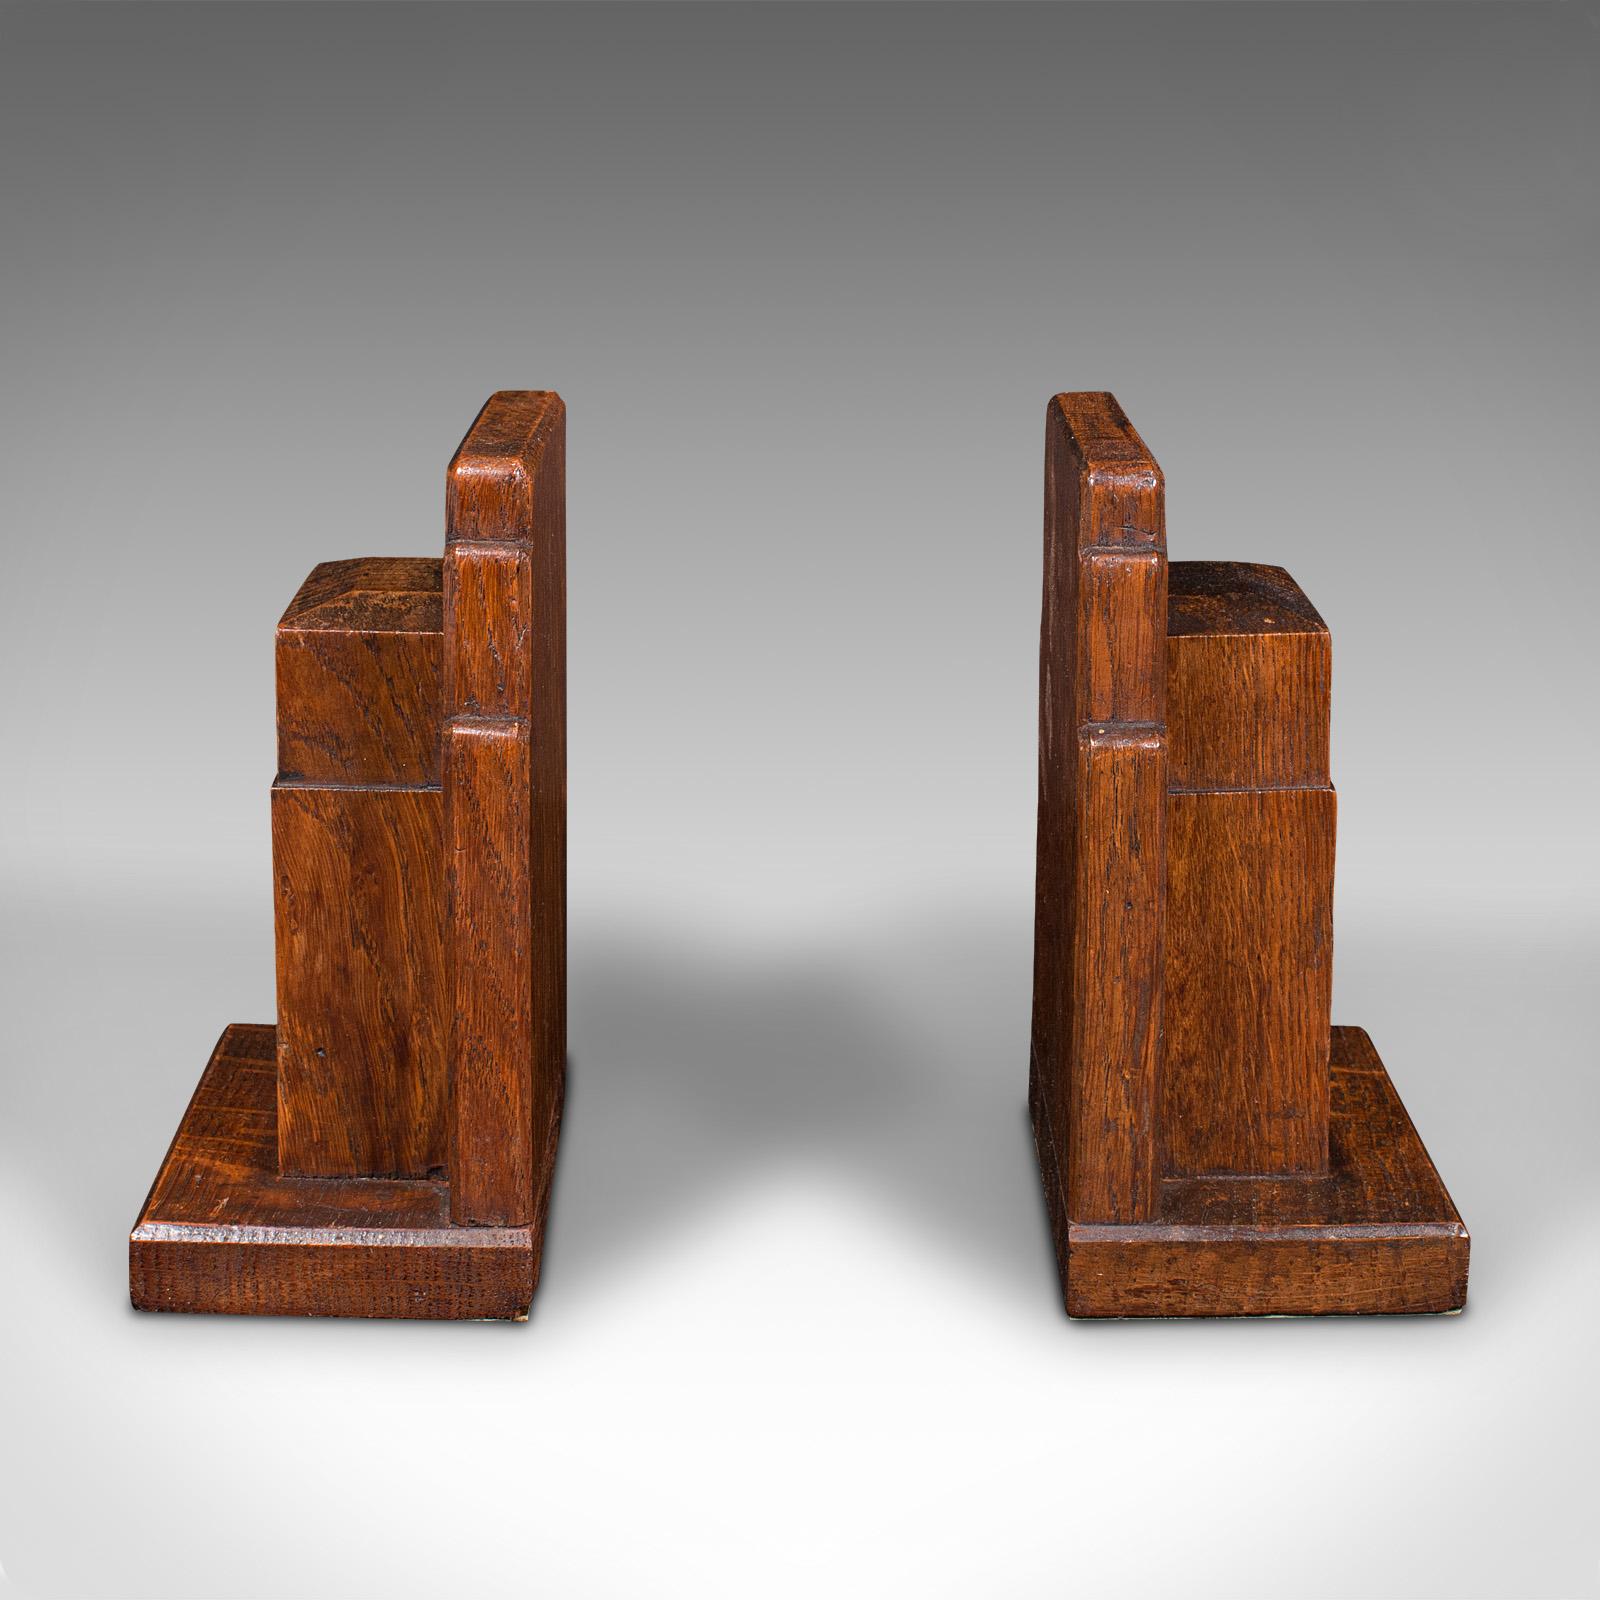 This is a vintage pair of decorative bookends. An English, oak book rest, dating to the early 20th century, circa 1930.

A charming bookend set, in the manner of George Russell's iconic taste
Displays a desirable aged patina and in good order